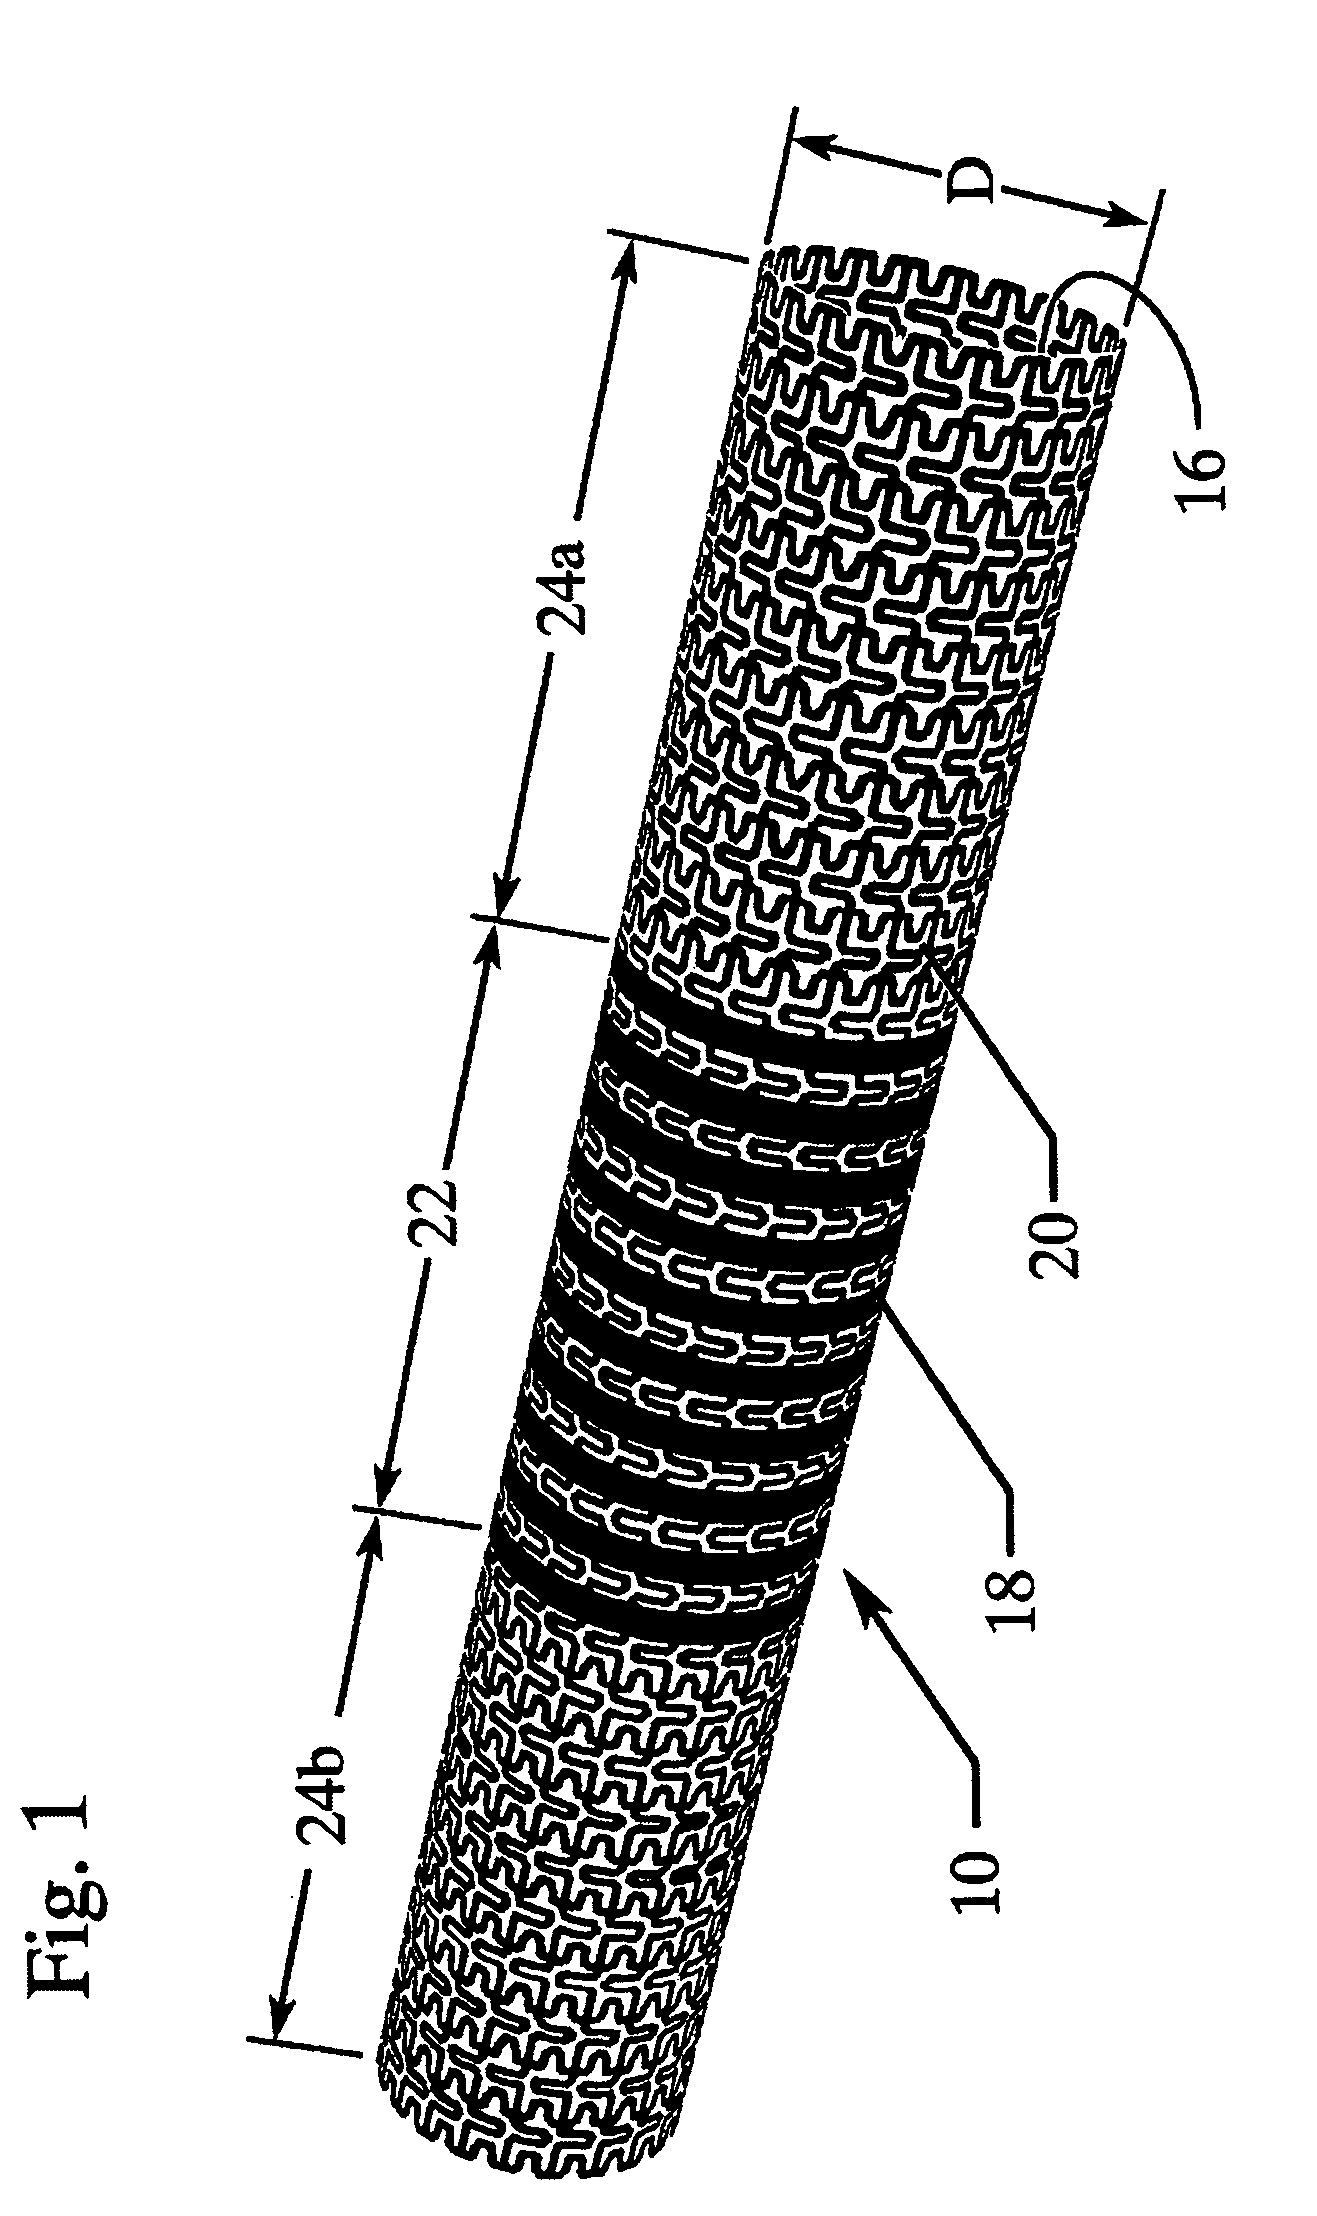 Pleated stent assembly